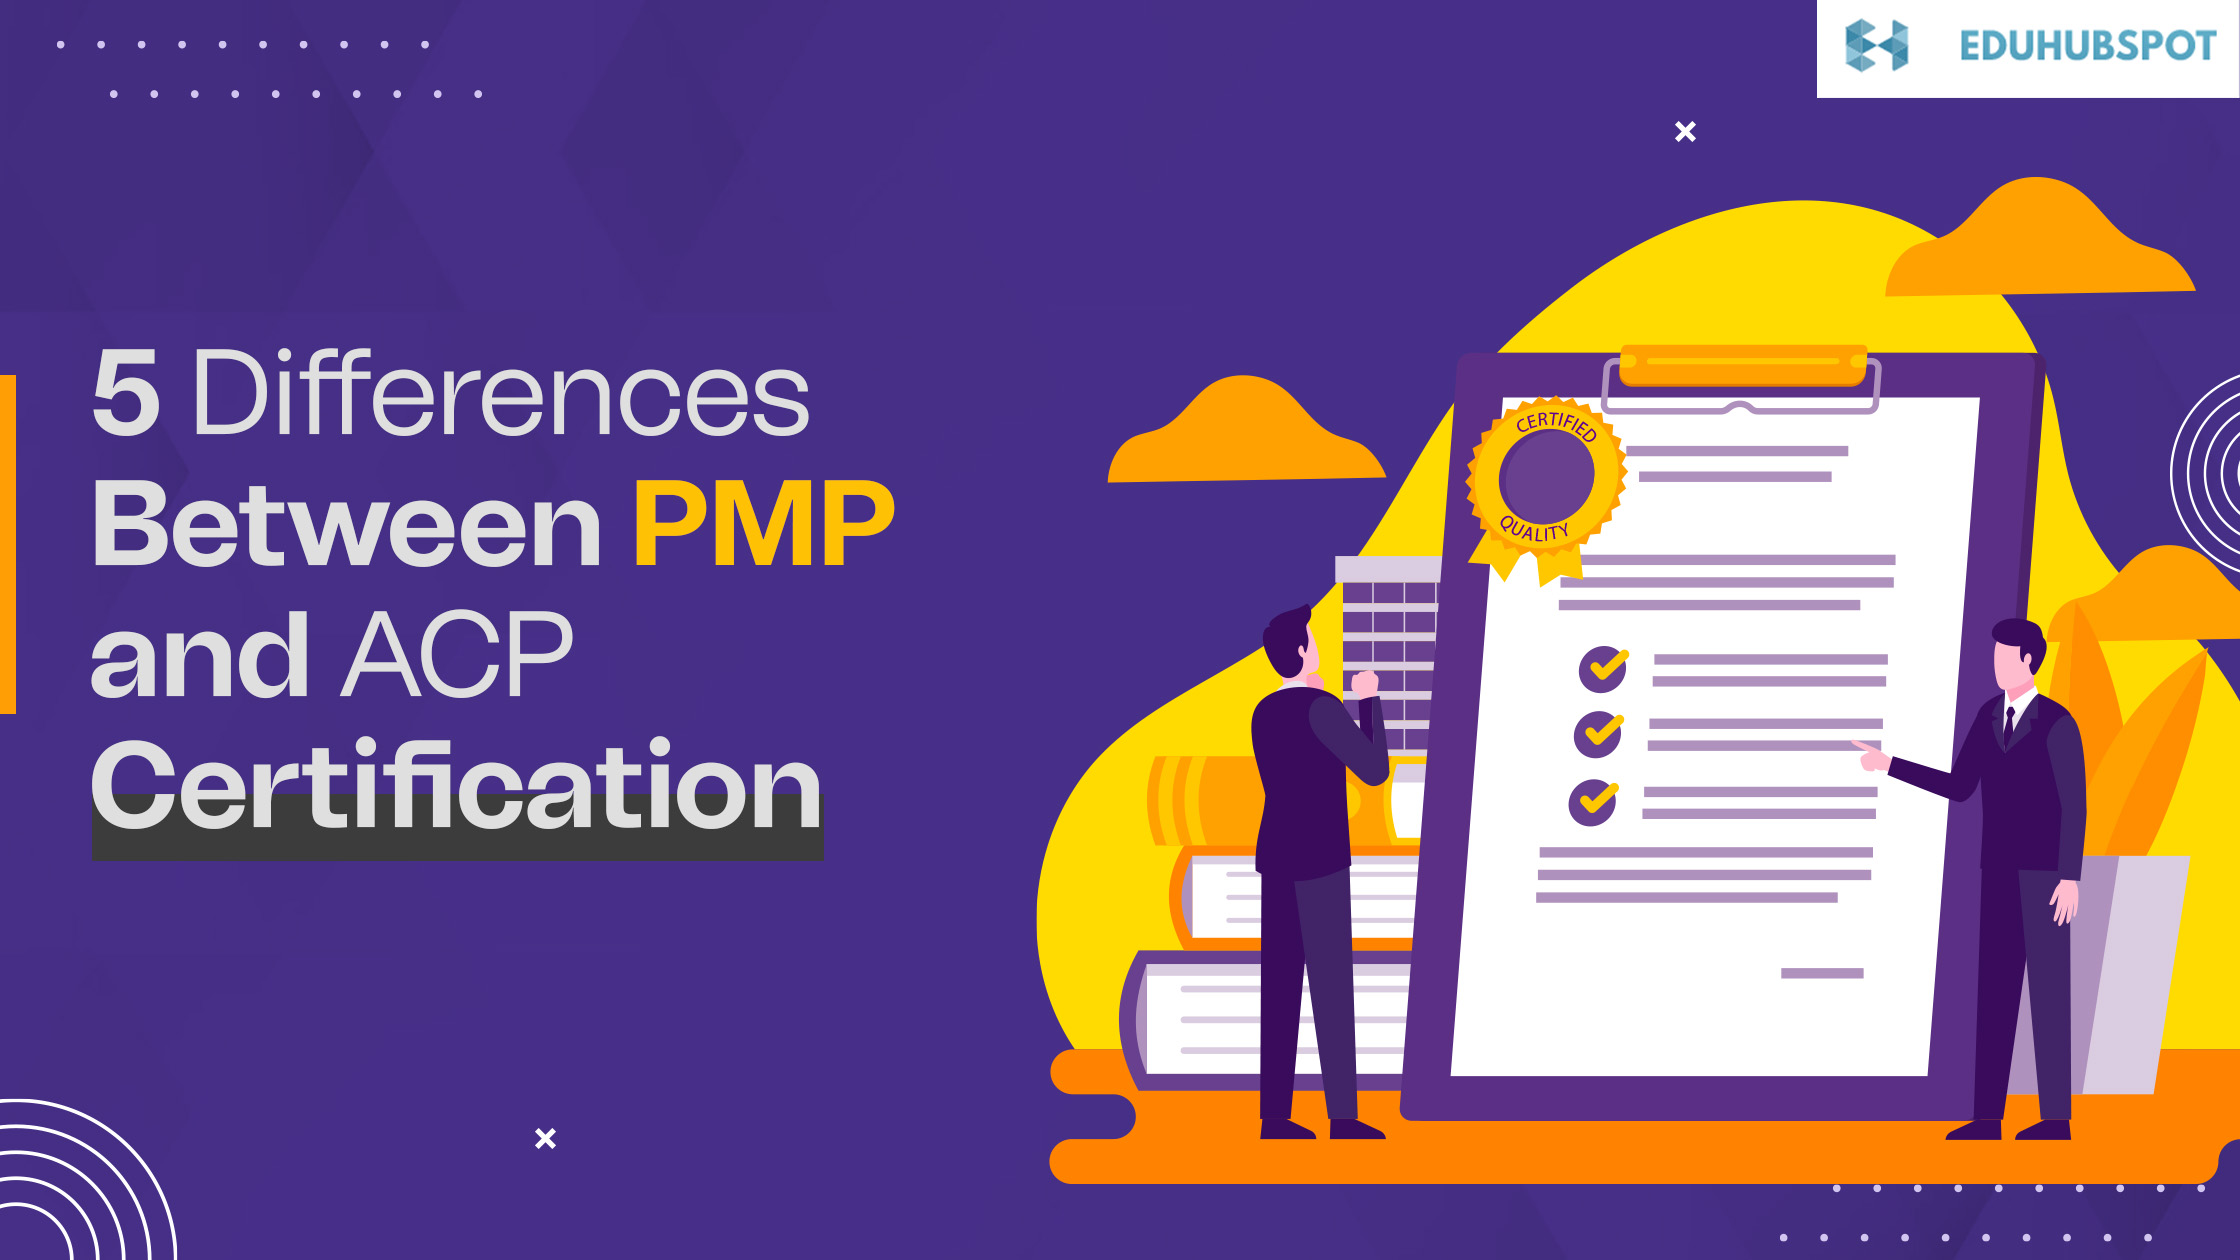 Differences Between PMP and ACP Certification